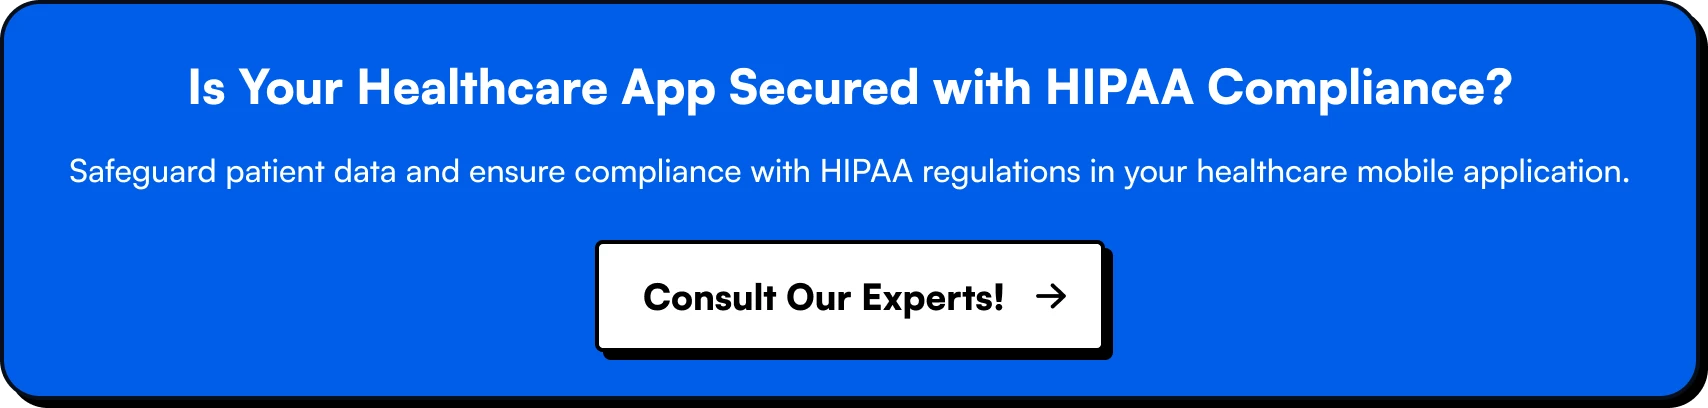 Is Your Healthcare App Secured with HIPAA Compliance